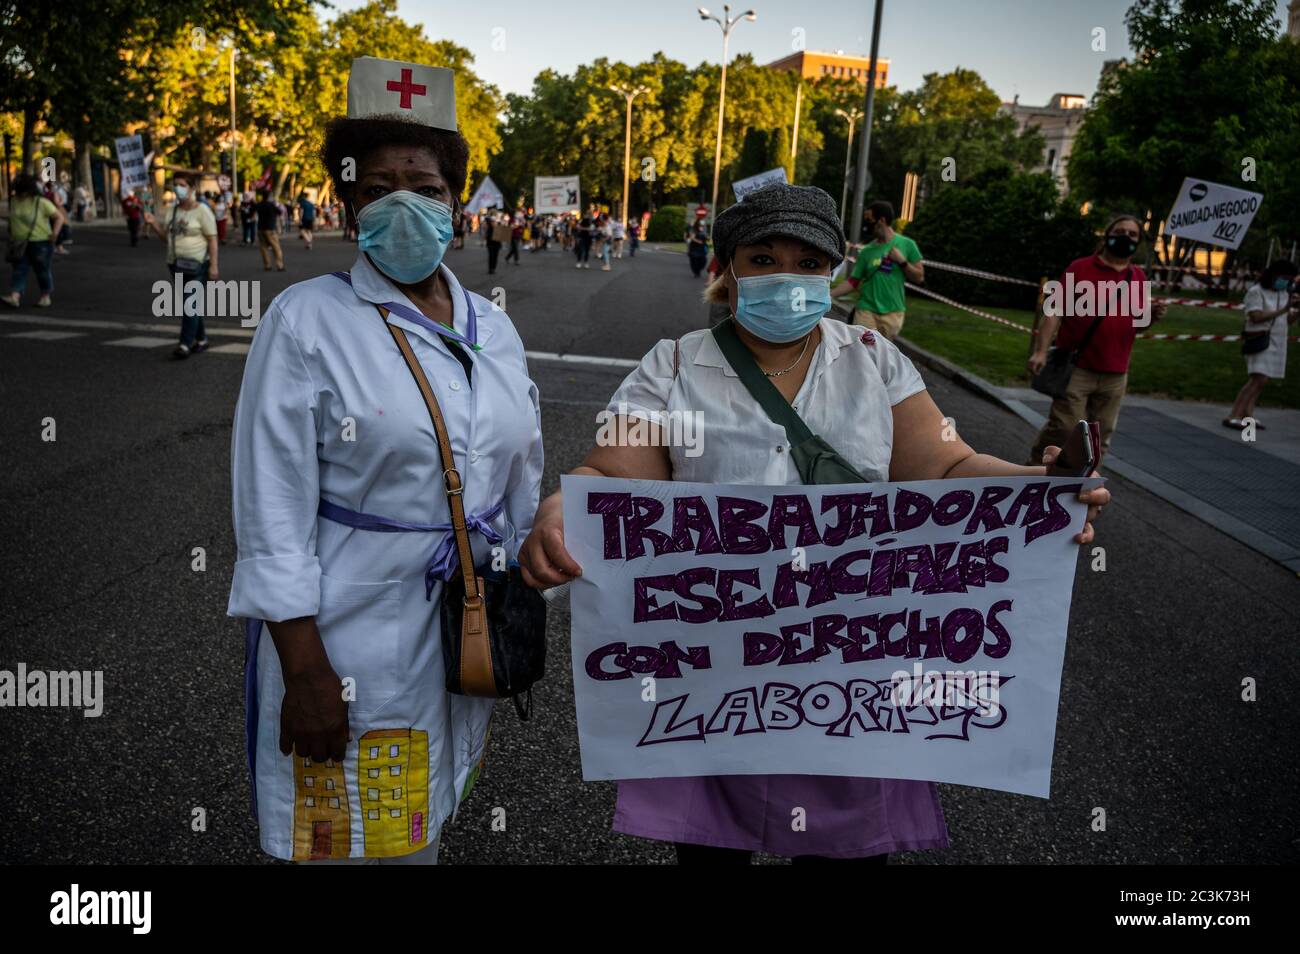 Madrid, Spain. 20th June, 2020. Madrid, Spain. June 20, 2020. A couple of women carrying a placard during a demonstration in support of the public healthcare system and protesting against privatization. Healthcare workers are carrying out protests during the coronavirus crisis against the precariousness of their work. Placard reads: essential workers, with labor rights. Credit: Marcos del Mazo/Alamy Live News Stock Photo